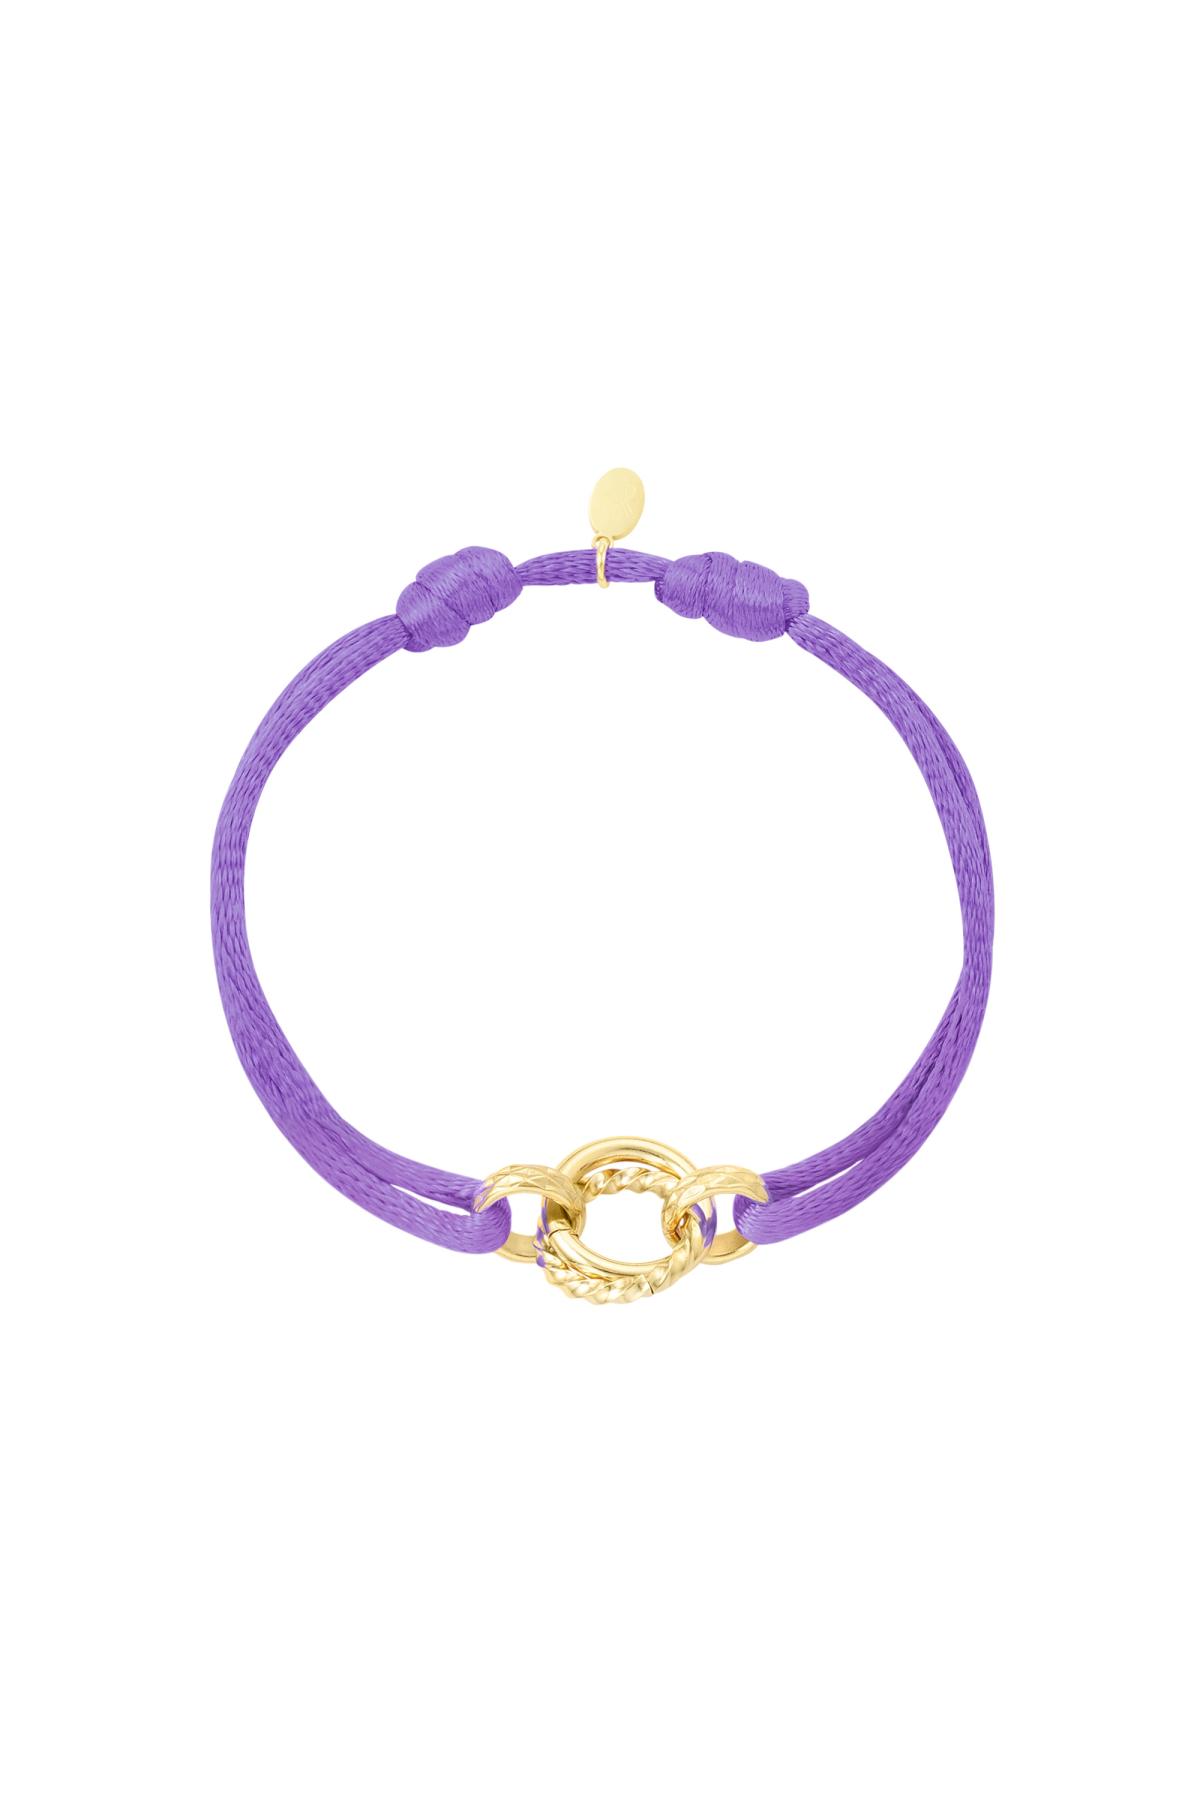 Cerchio bracciale in tessuto Lilac Stainless Steel h5 